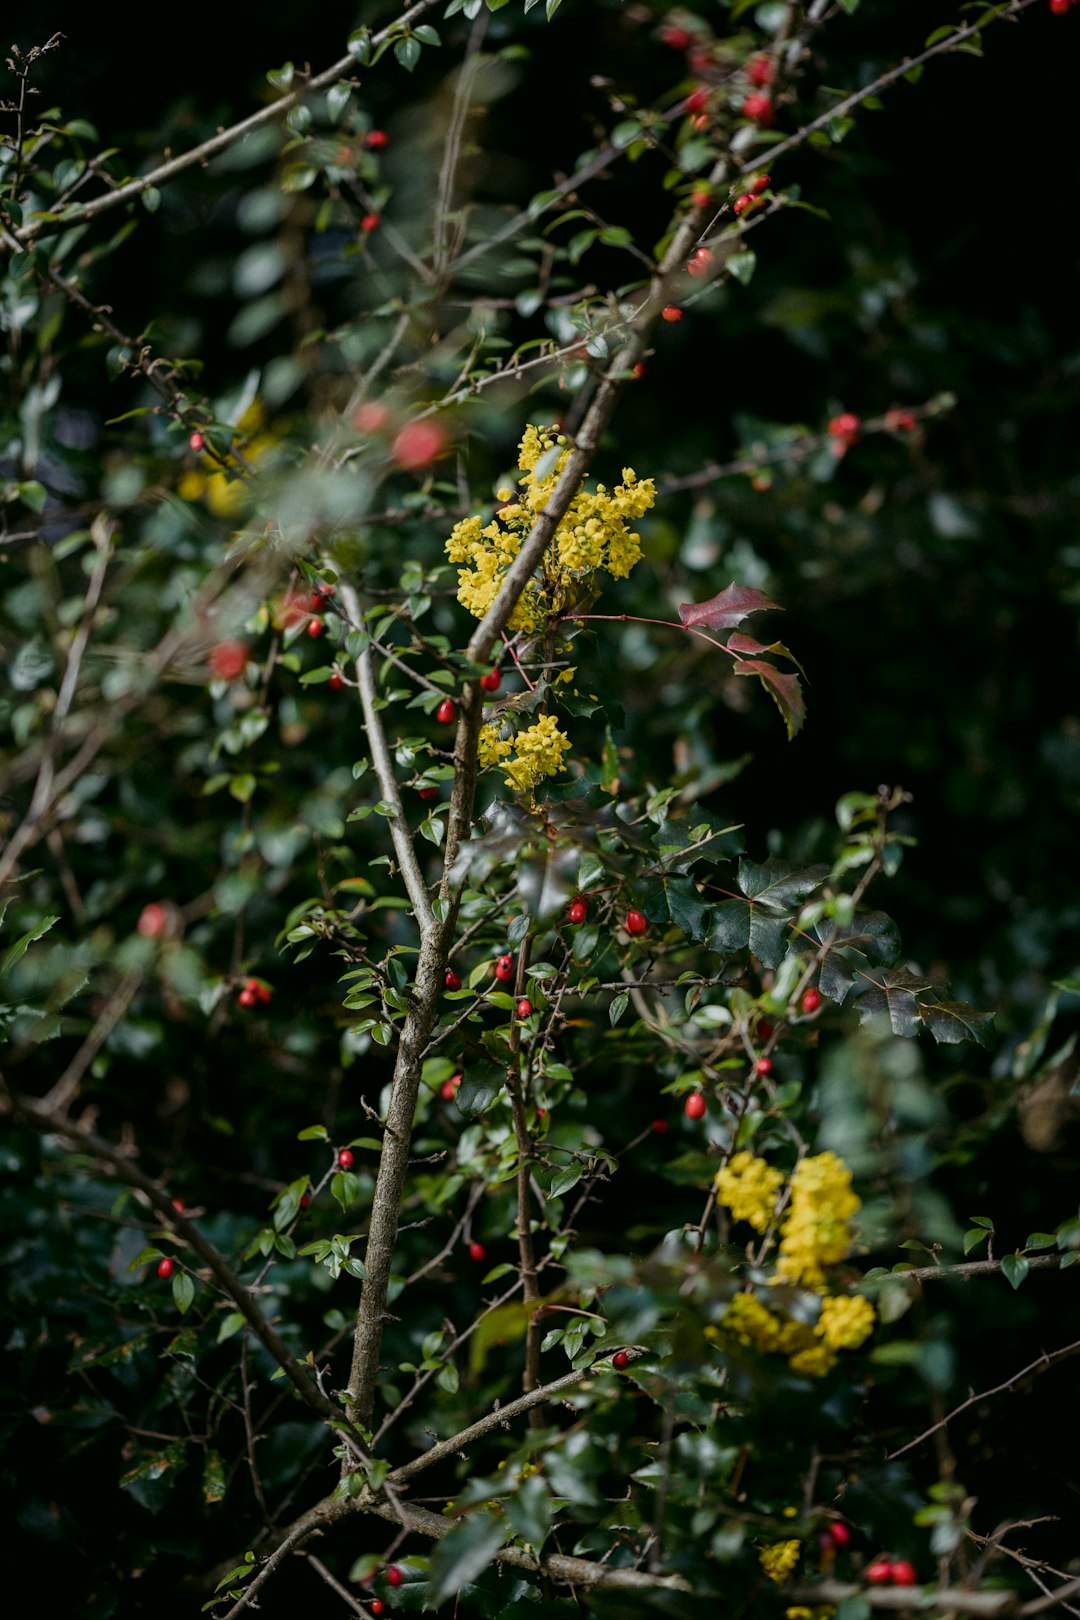 yellow flowers on brown tree branch